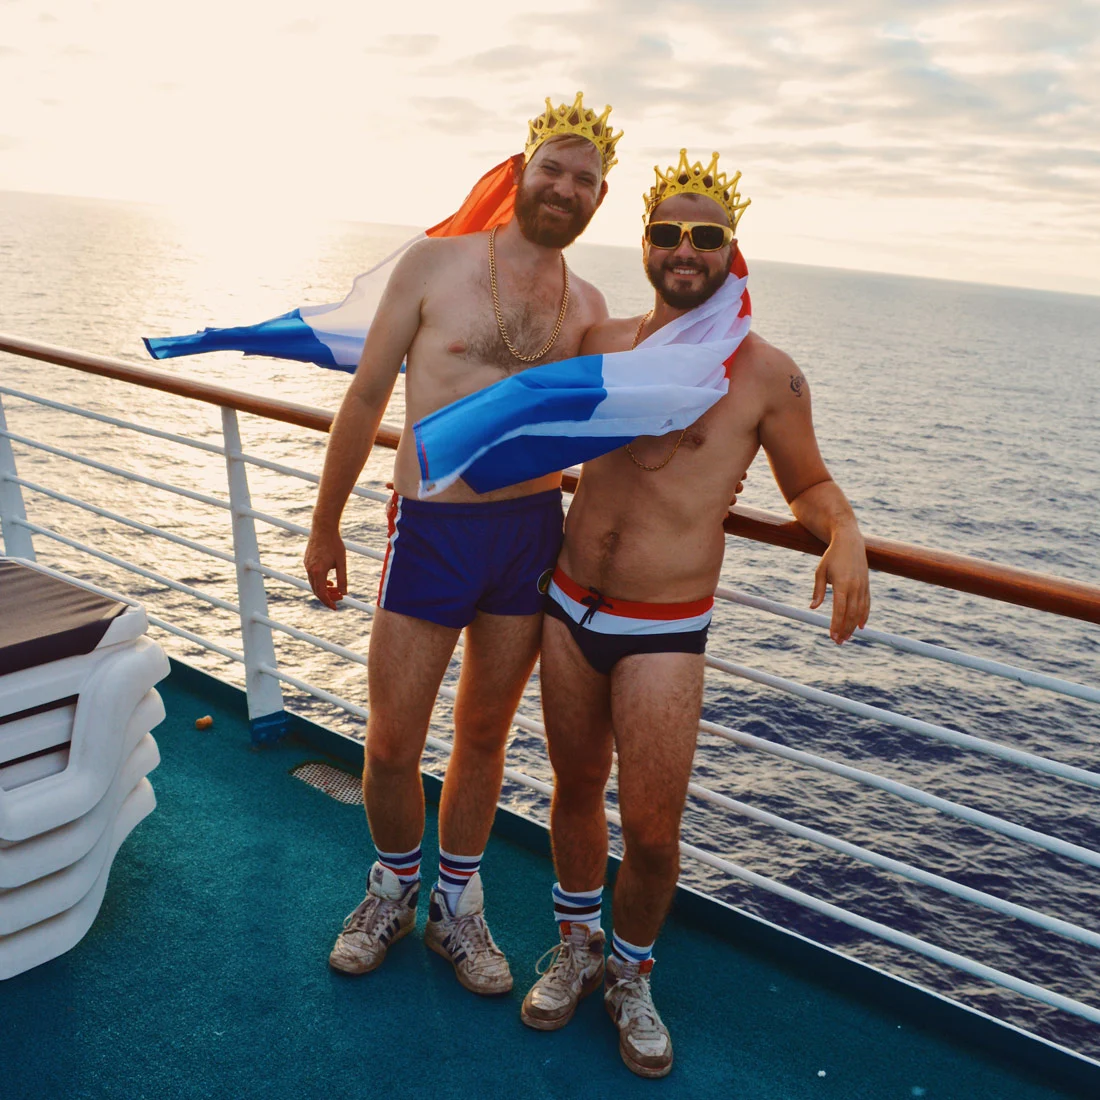 Karl / Daan with Dutch flags, crowns, and the sunset © CoupleofMen.com